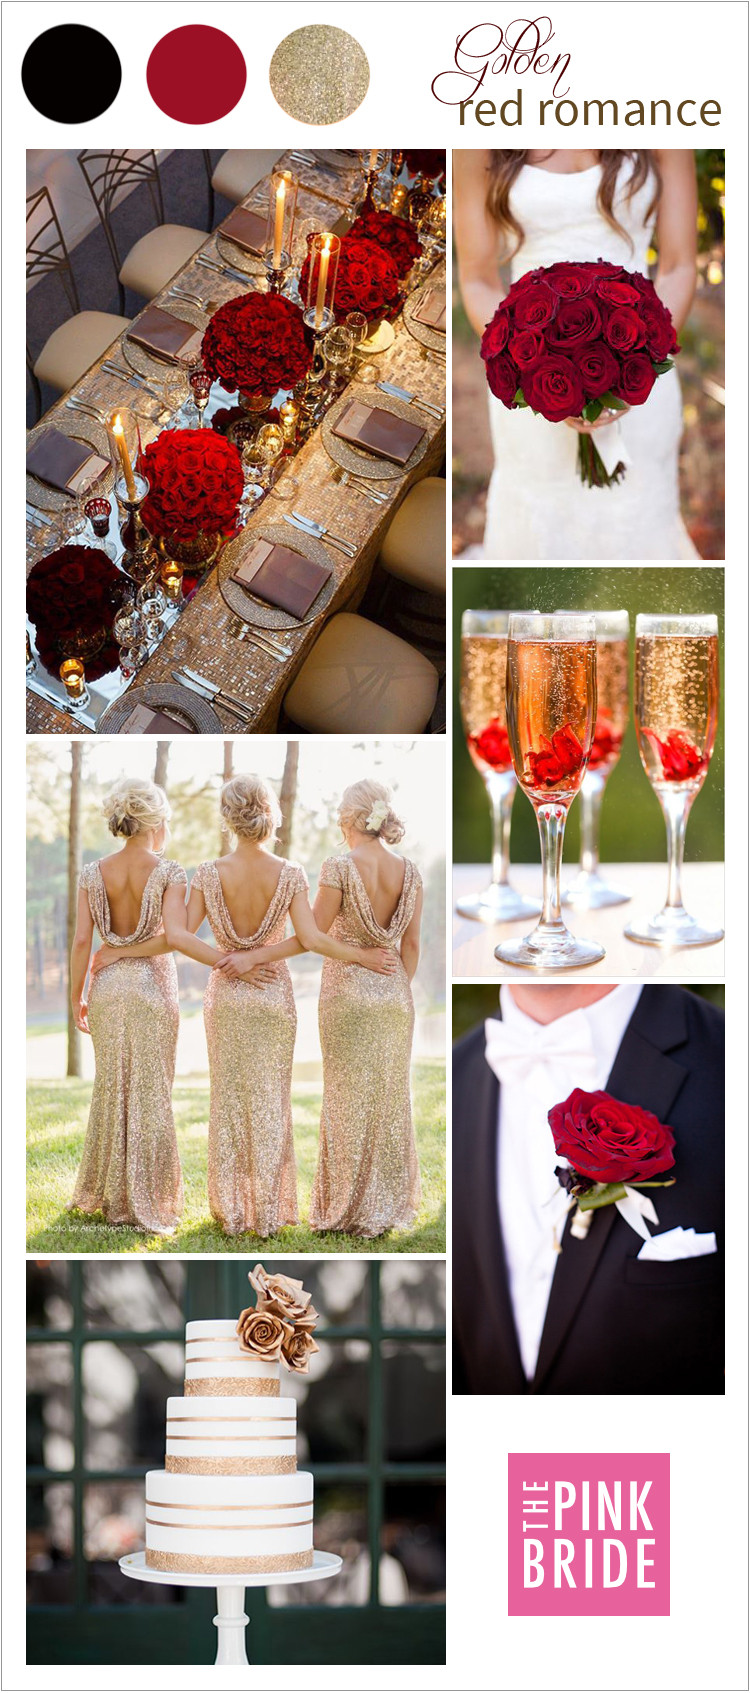 Gold Wedding Color Schemes
 Wedding Color Board Golden Red Romance The Pink Bride